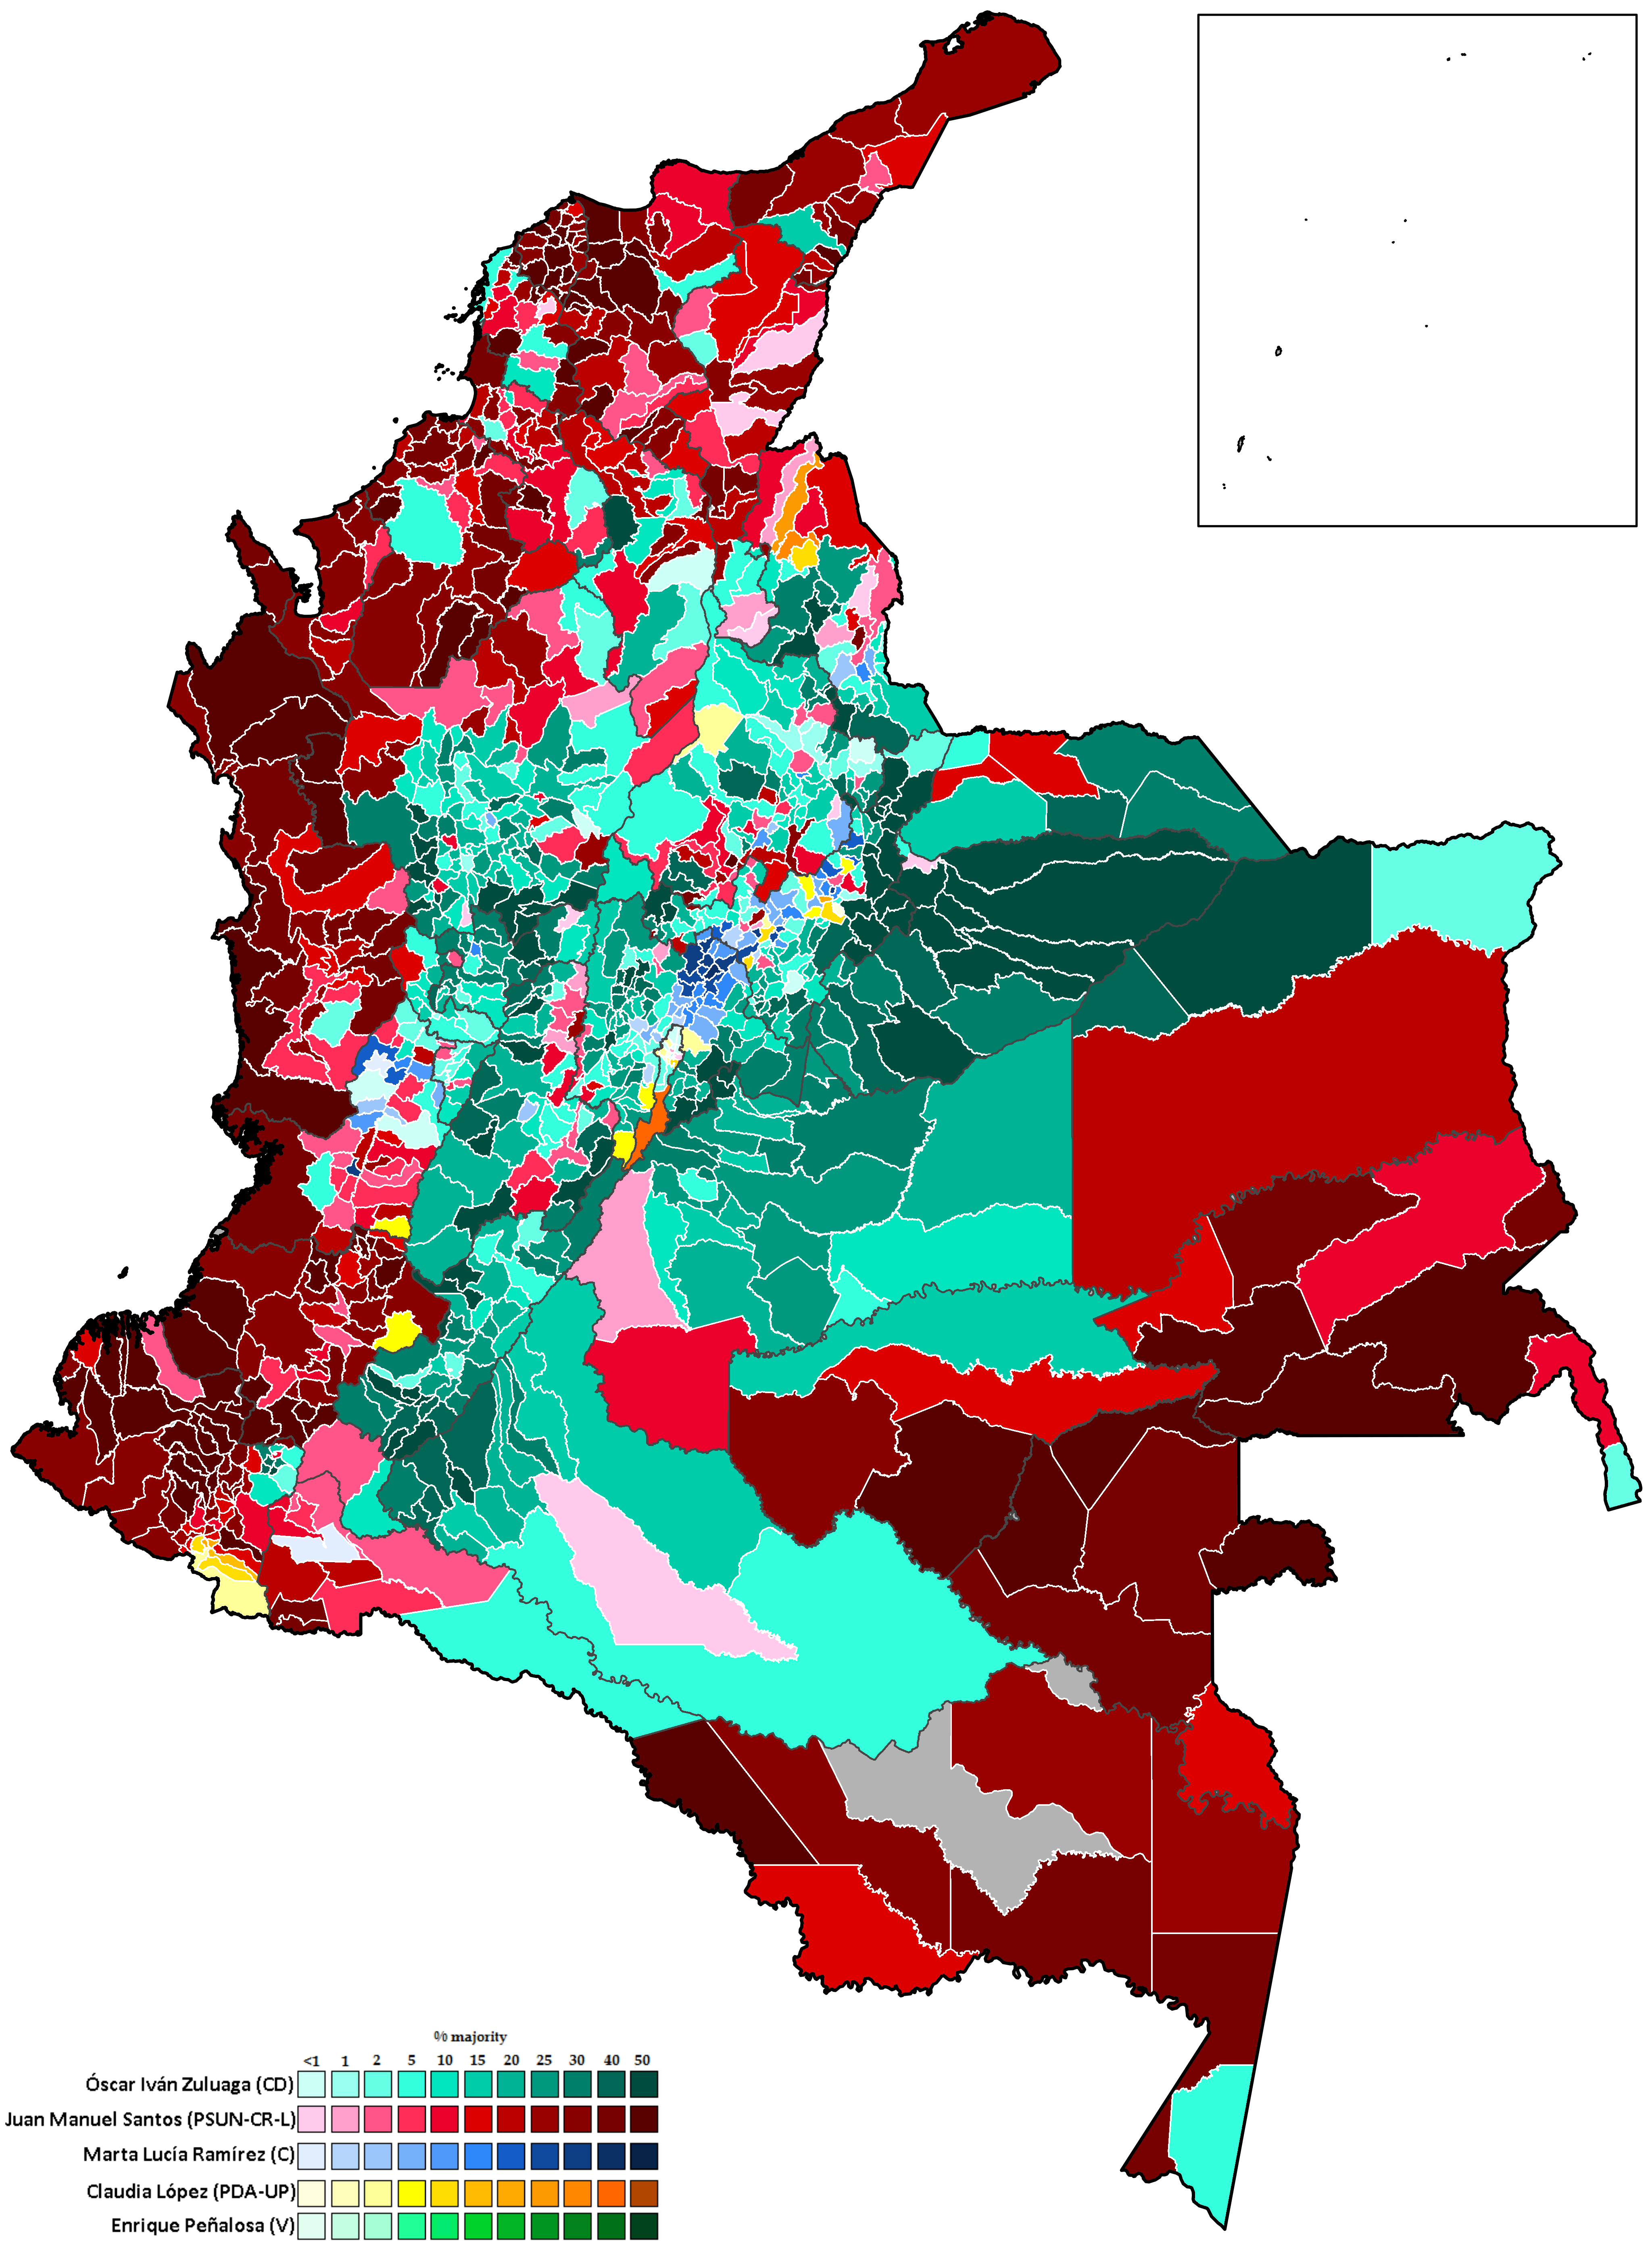 colombian_presidential_election__2014_by_fed42-dajixk3.png